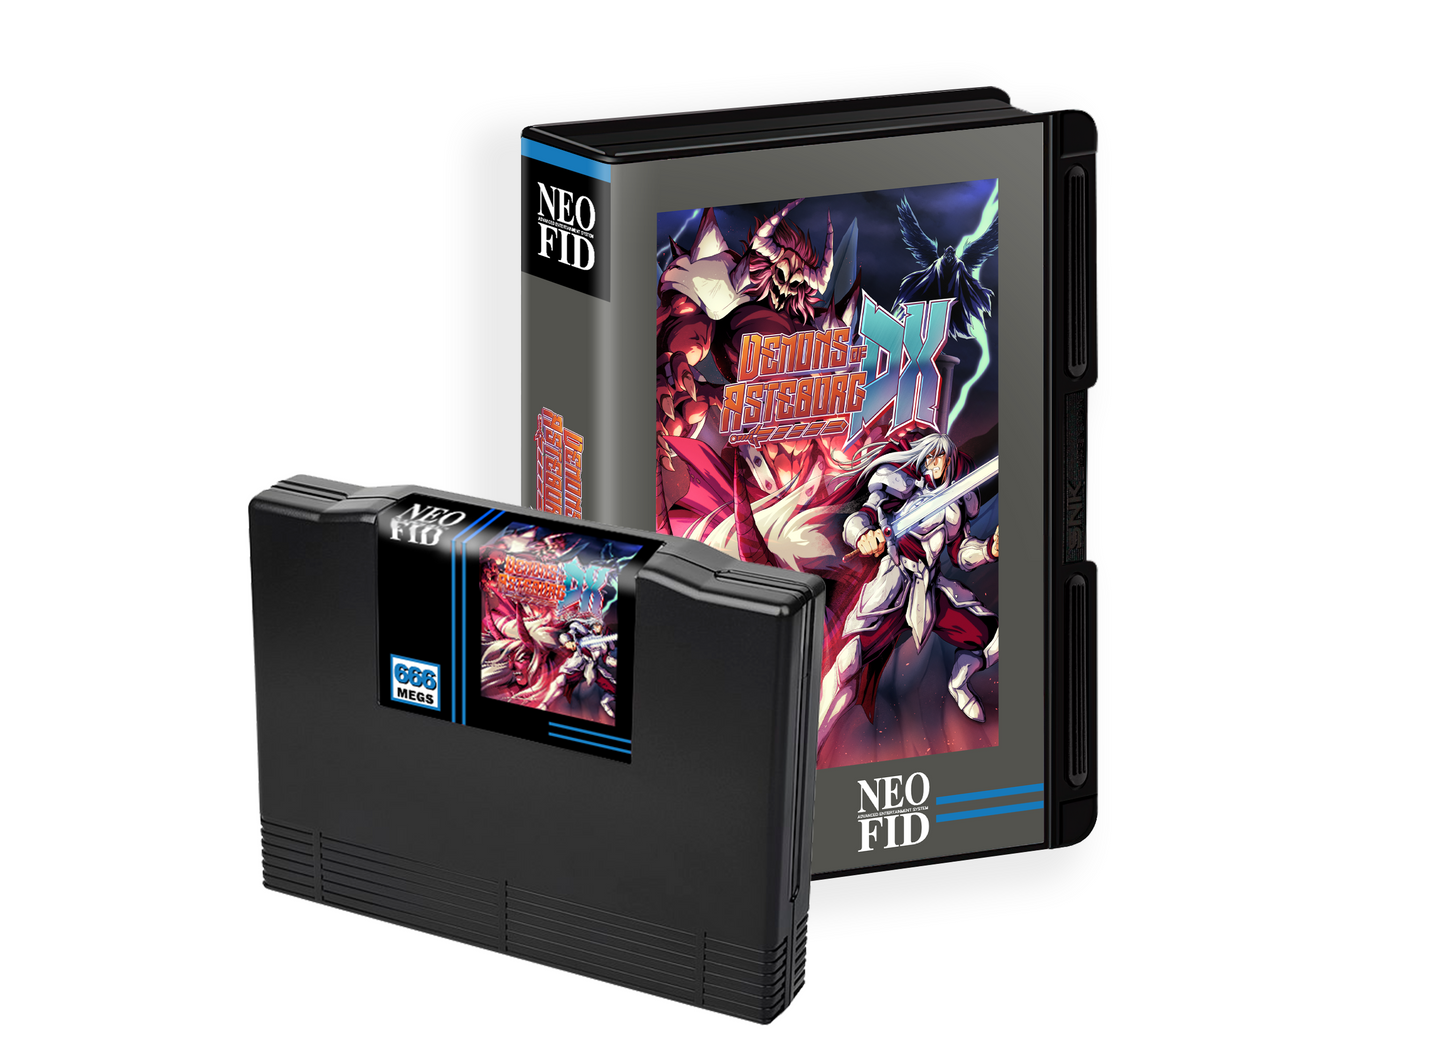 [PRE-ORDER] Demons of Asteborg DX (new boxed cartridge with printed manual for Neo-Geo AES)